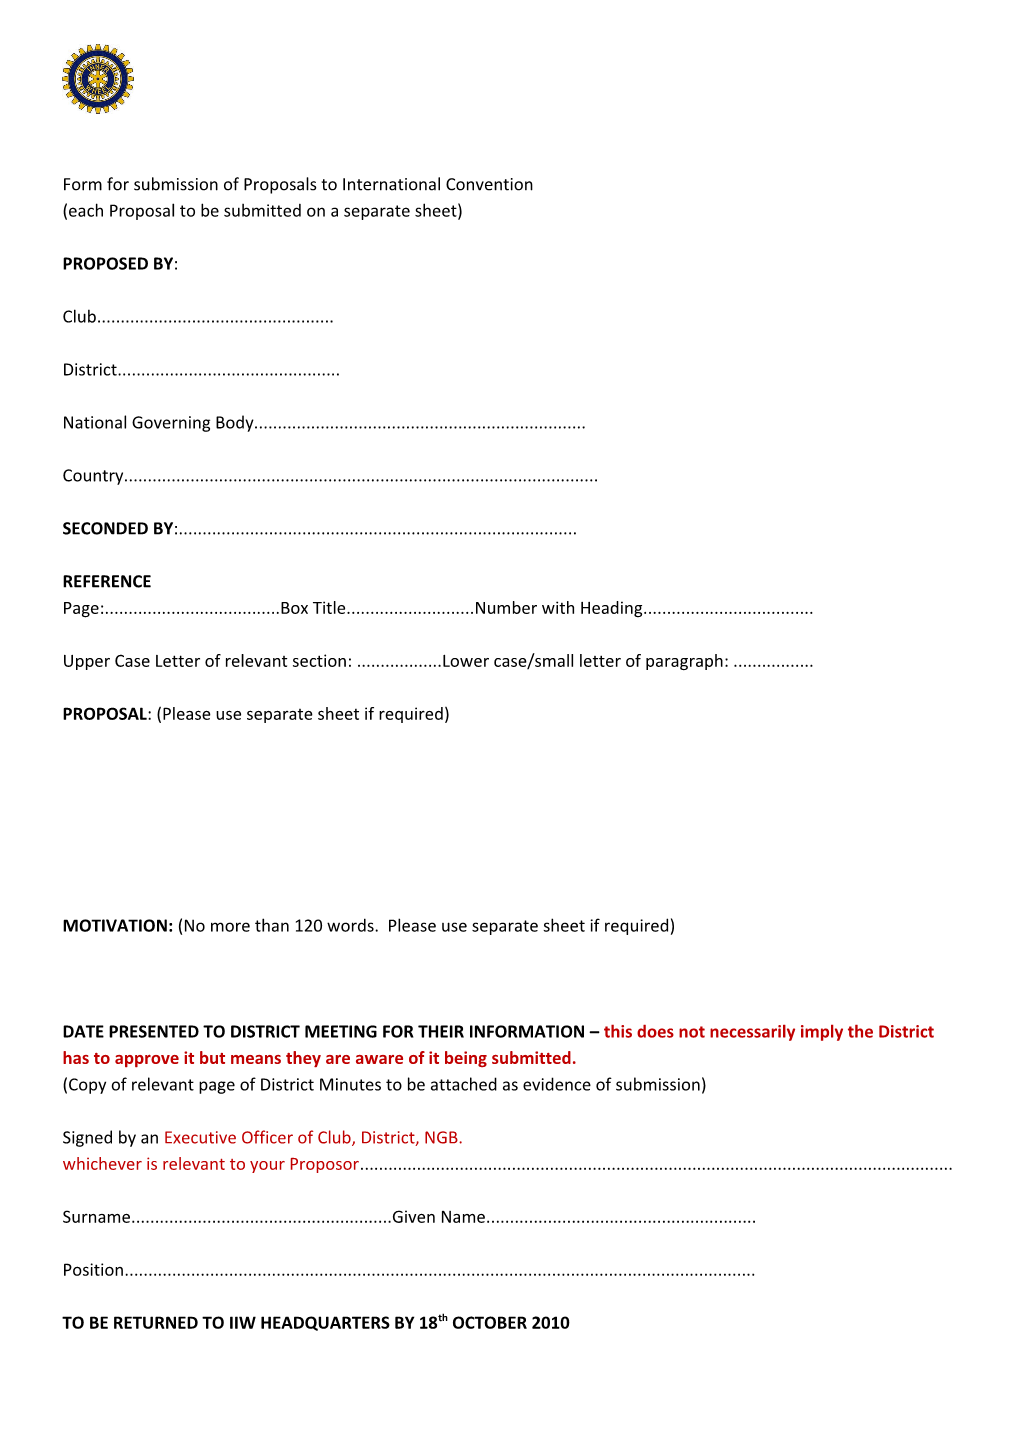 Form for Submission of Proposals to International Convention